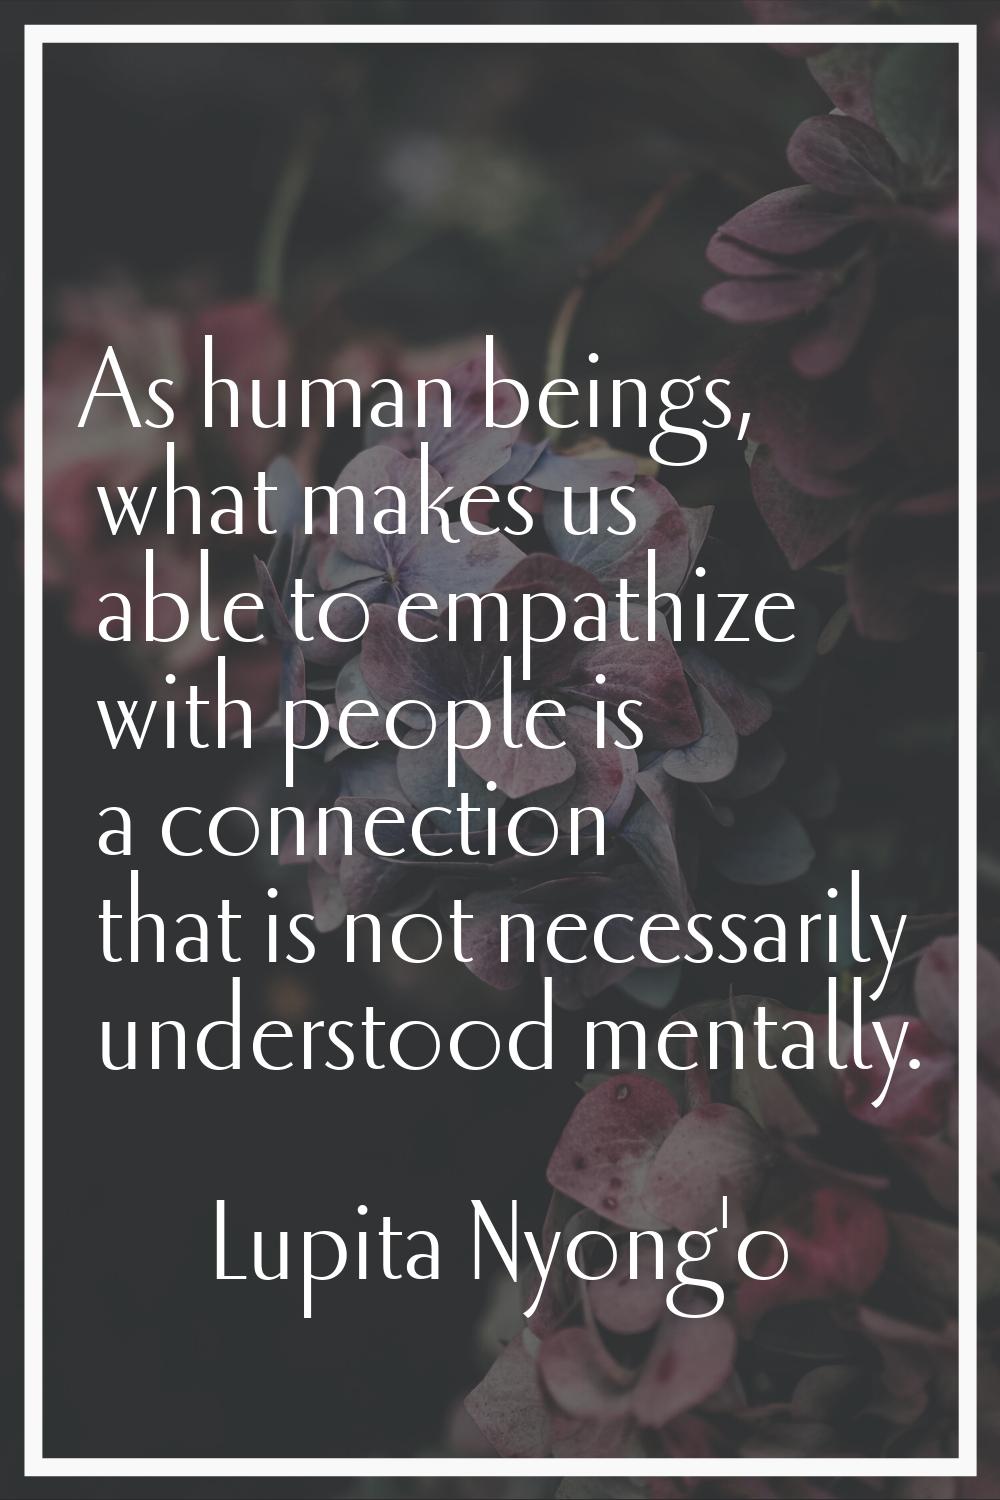 As human beings, what makes us able to empathize with people is a connection that is not necessaril